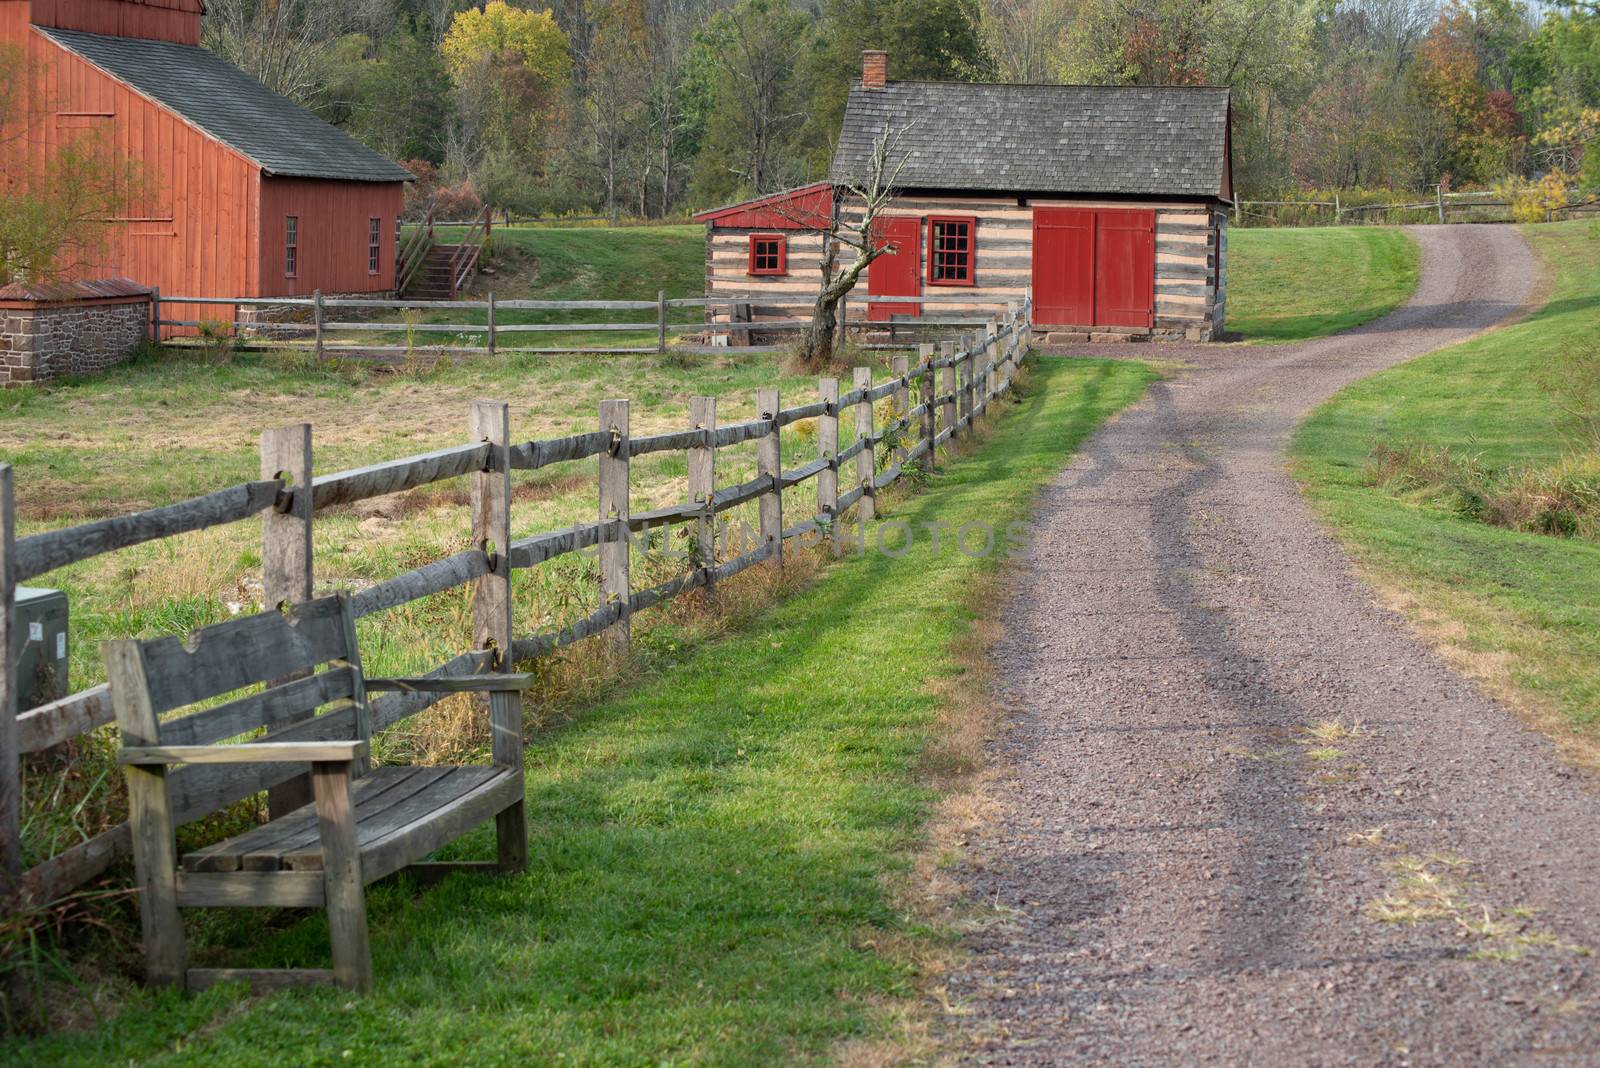 Gravel path leads past an empty bench, red barn and log cabin by marysalen